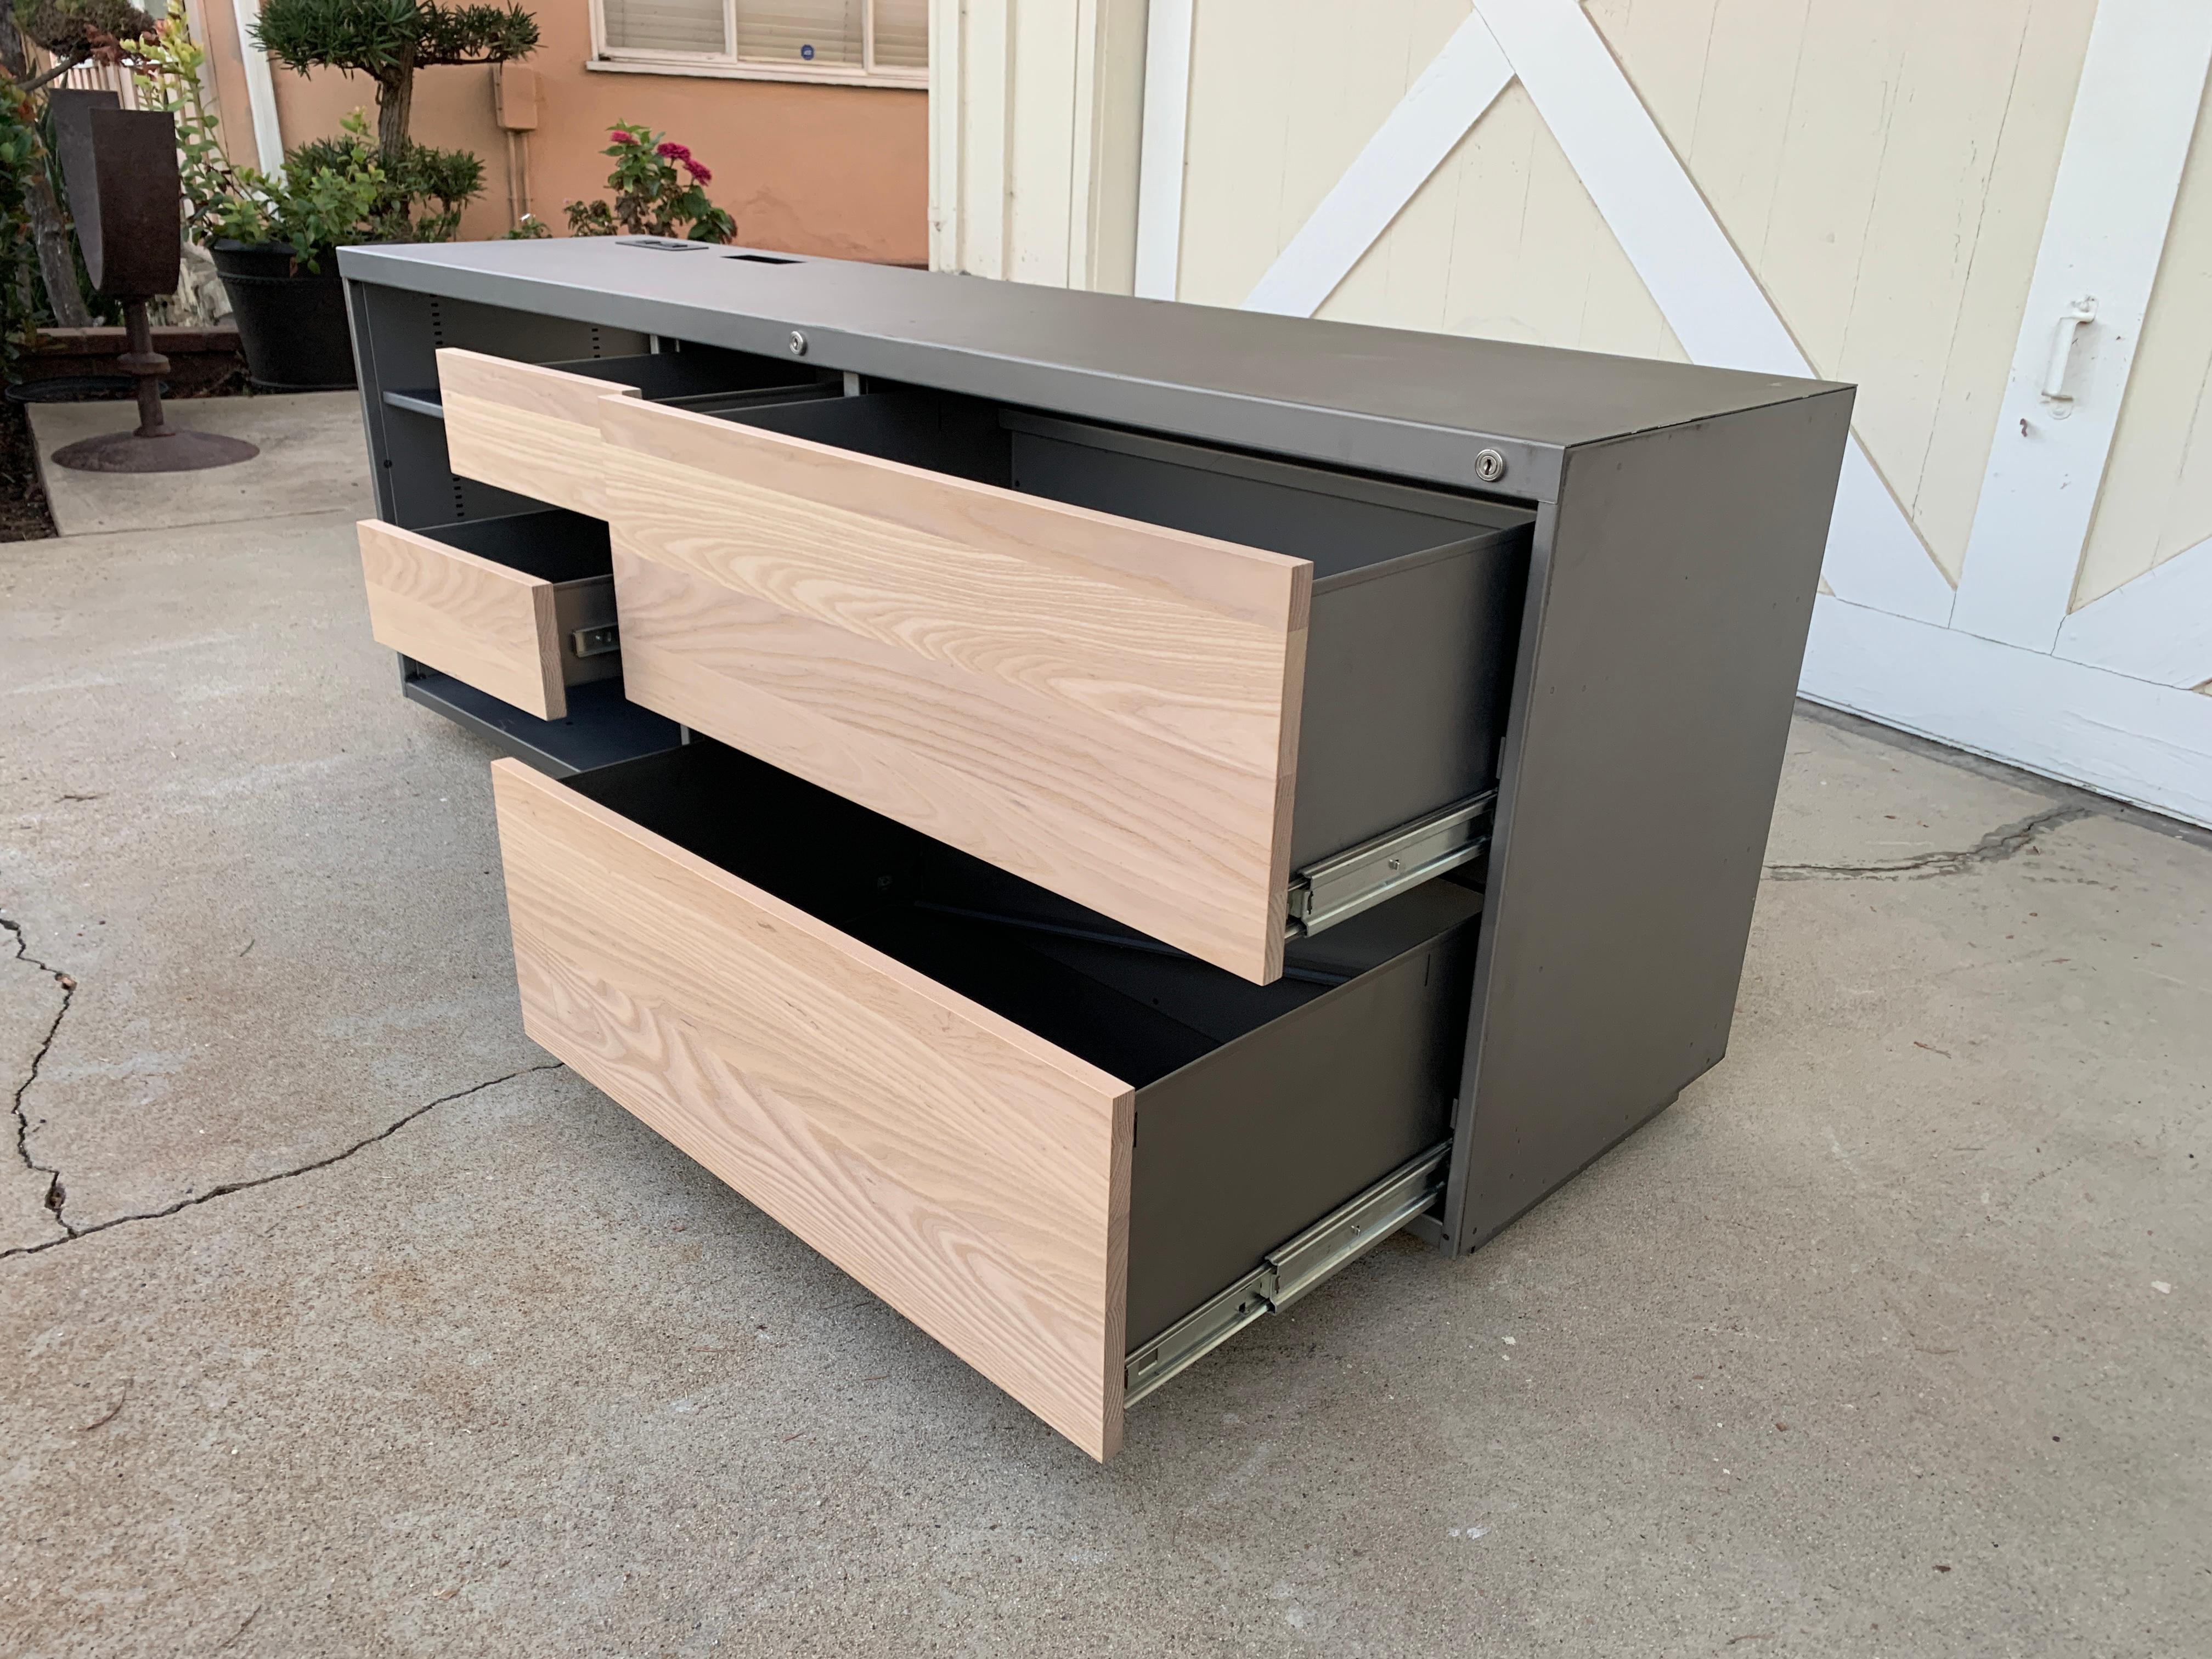 Custom Industrial credenza handmade in Los Angeles California.The piece is made of solid steel, the drawers have maple wood fronts, they also have an outlet to power appliances like computer or other electronics.

The drawers have a locking